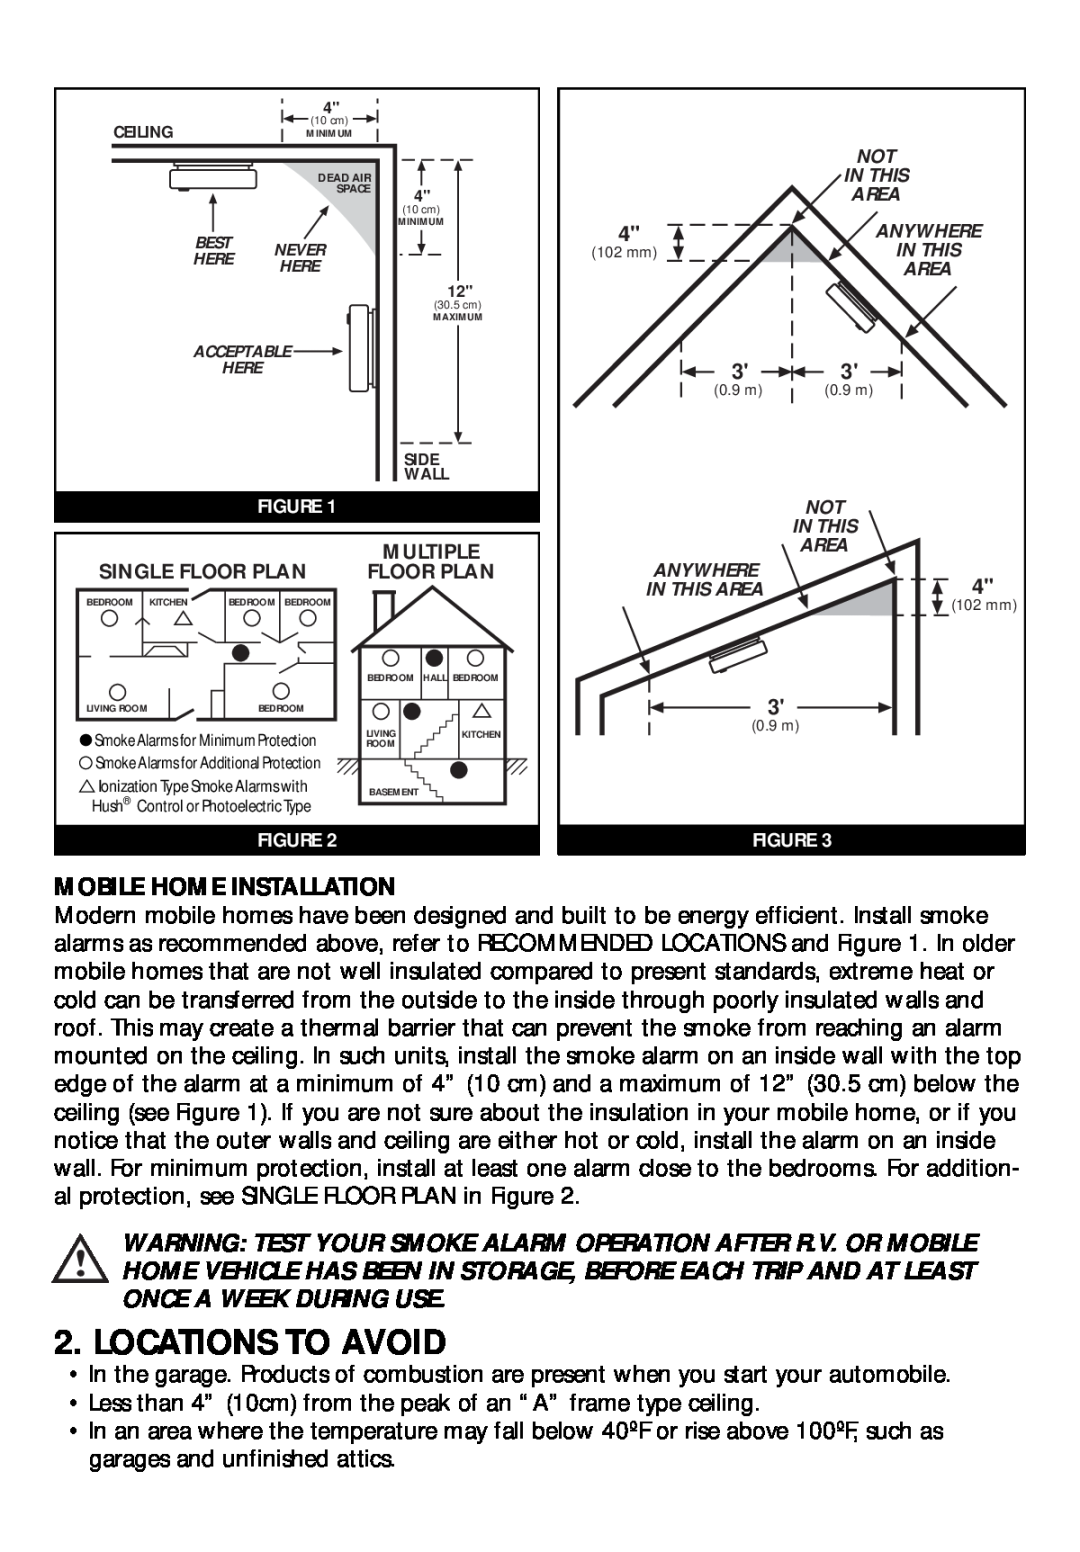 Kidde RF-SM-DC manual Locations To Avoid, Mobile Home Installation 